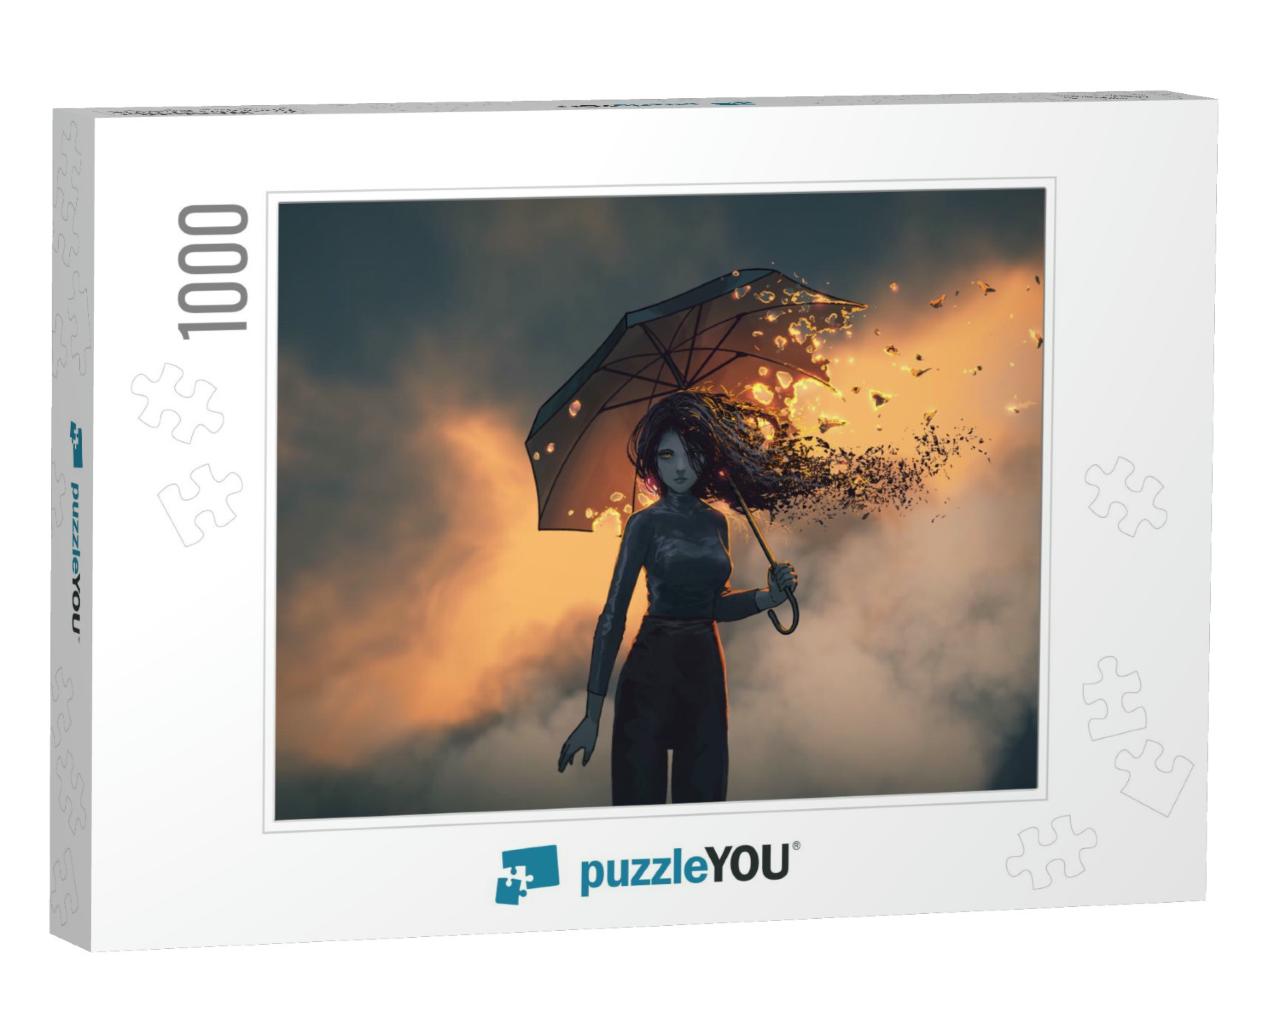 Mysterious Woman Holds the Burning Umbrella Standing Agai... Jigsaw Puzzle with 1000 pieces